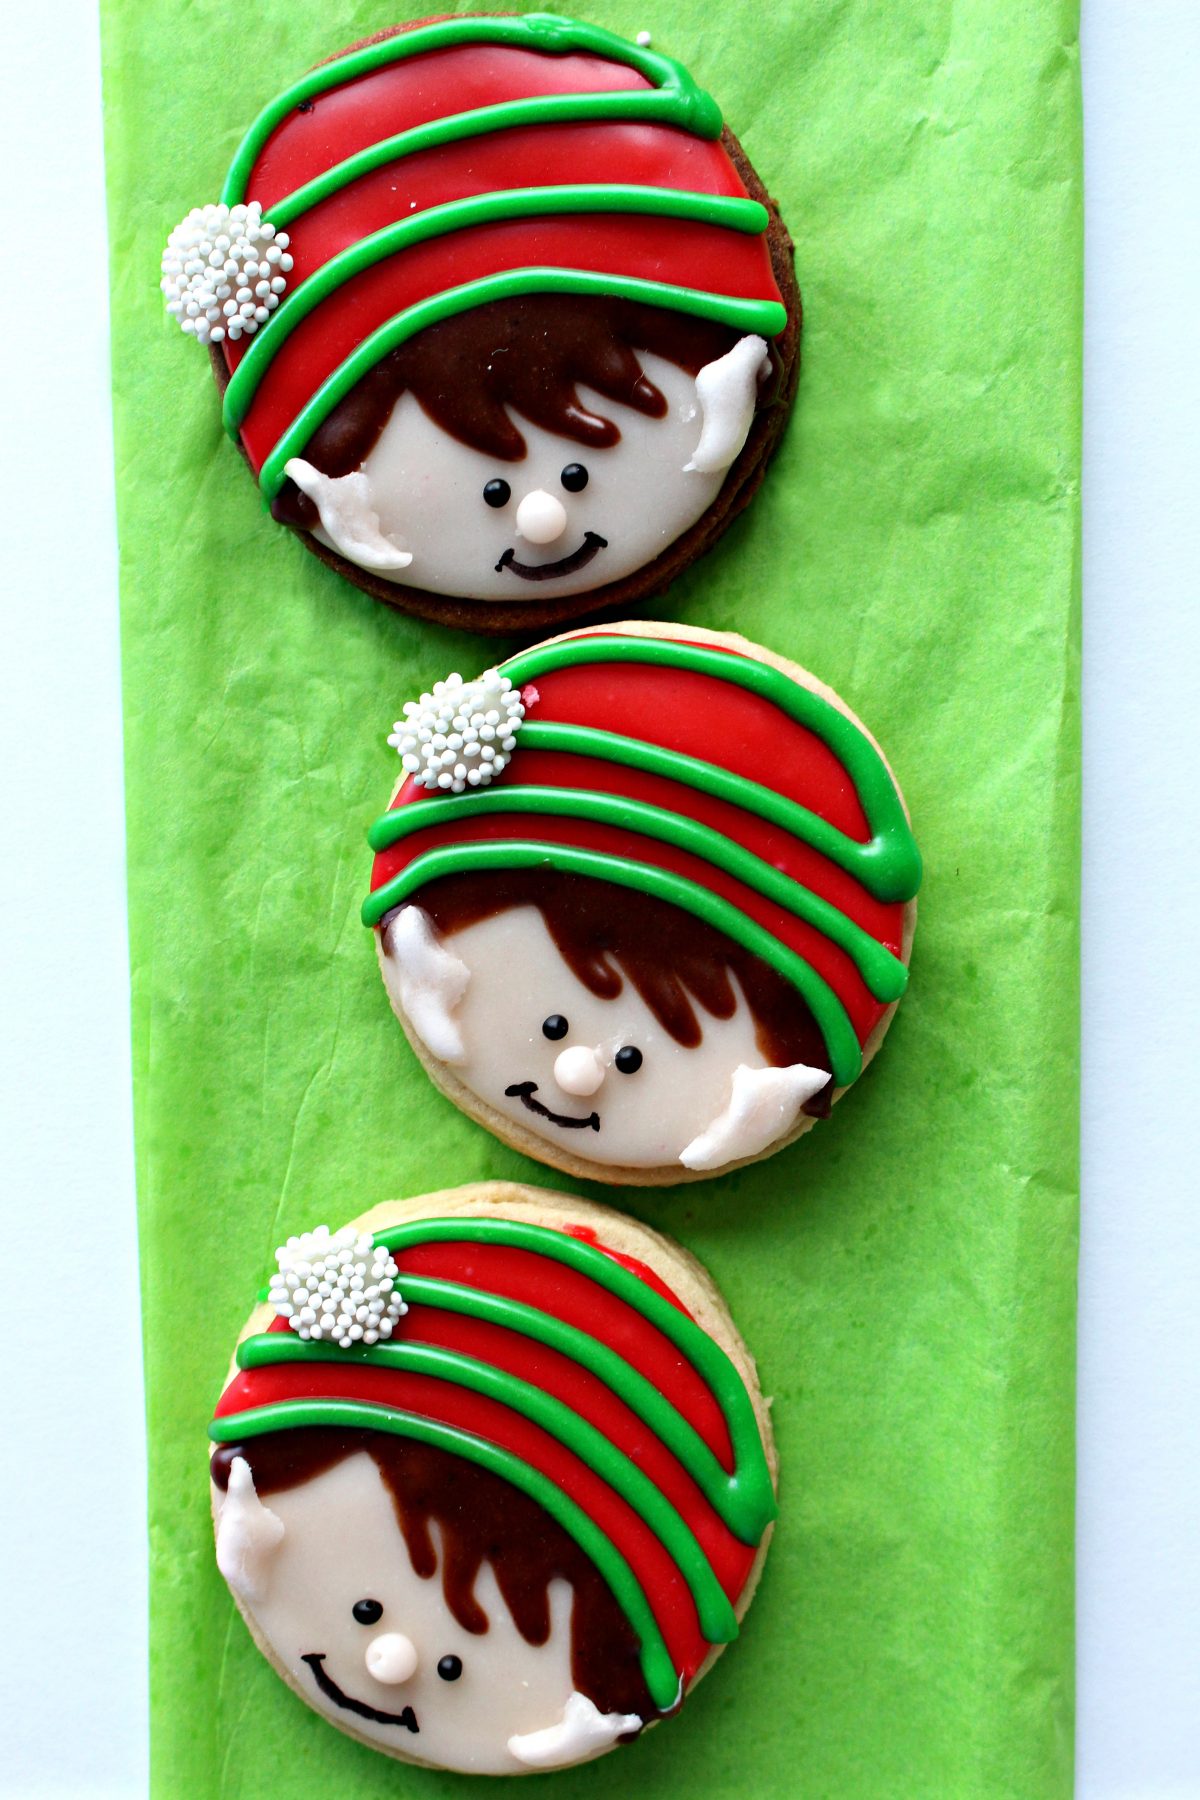 Three elf cookies with faces and red and green stocking caps.